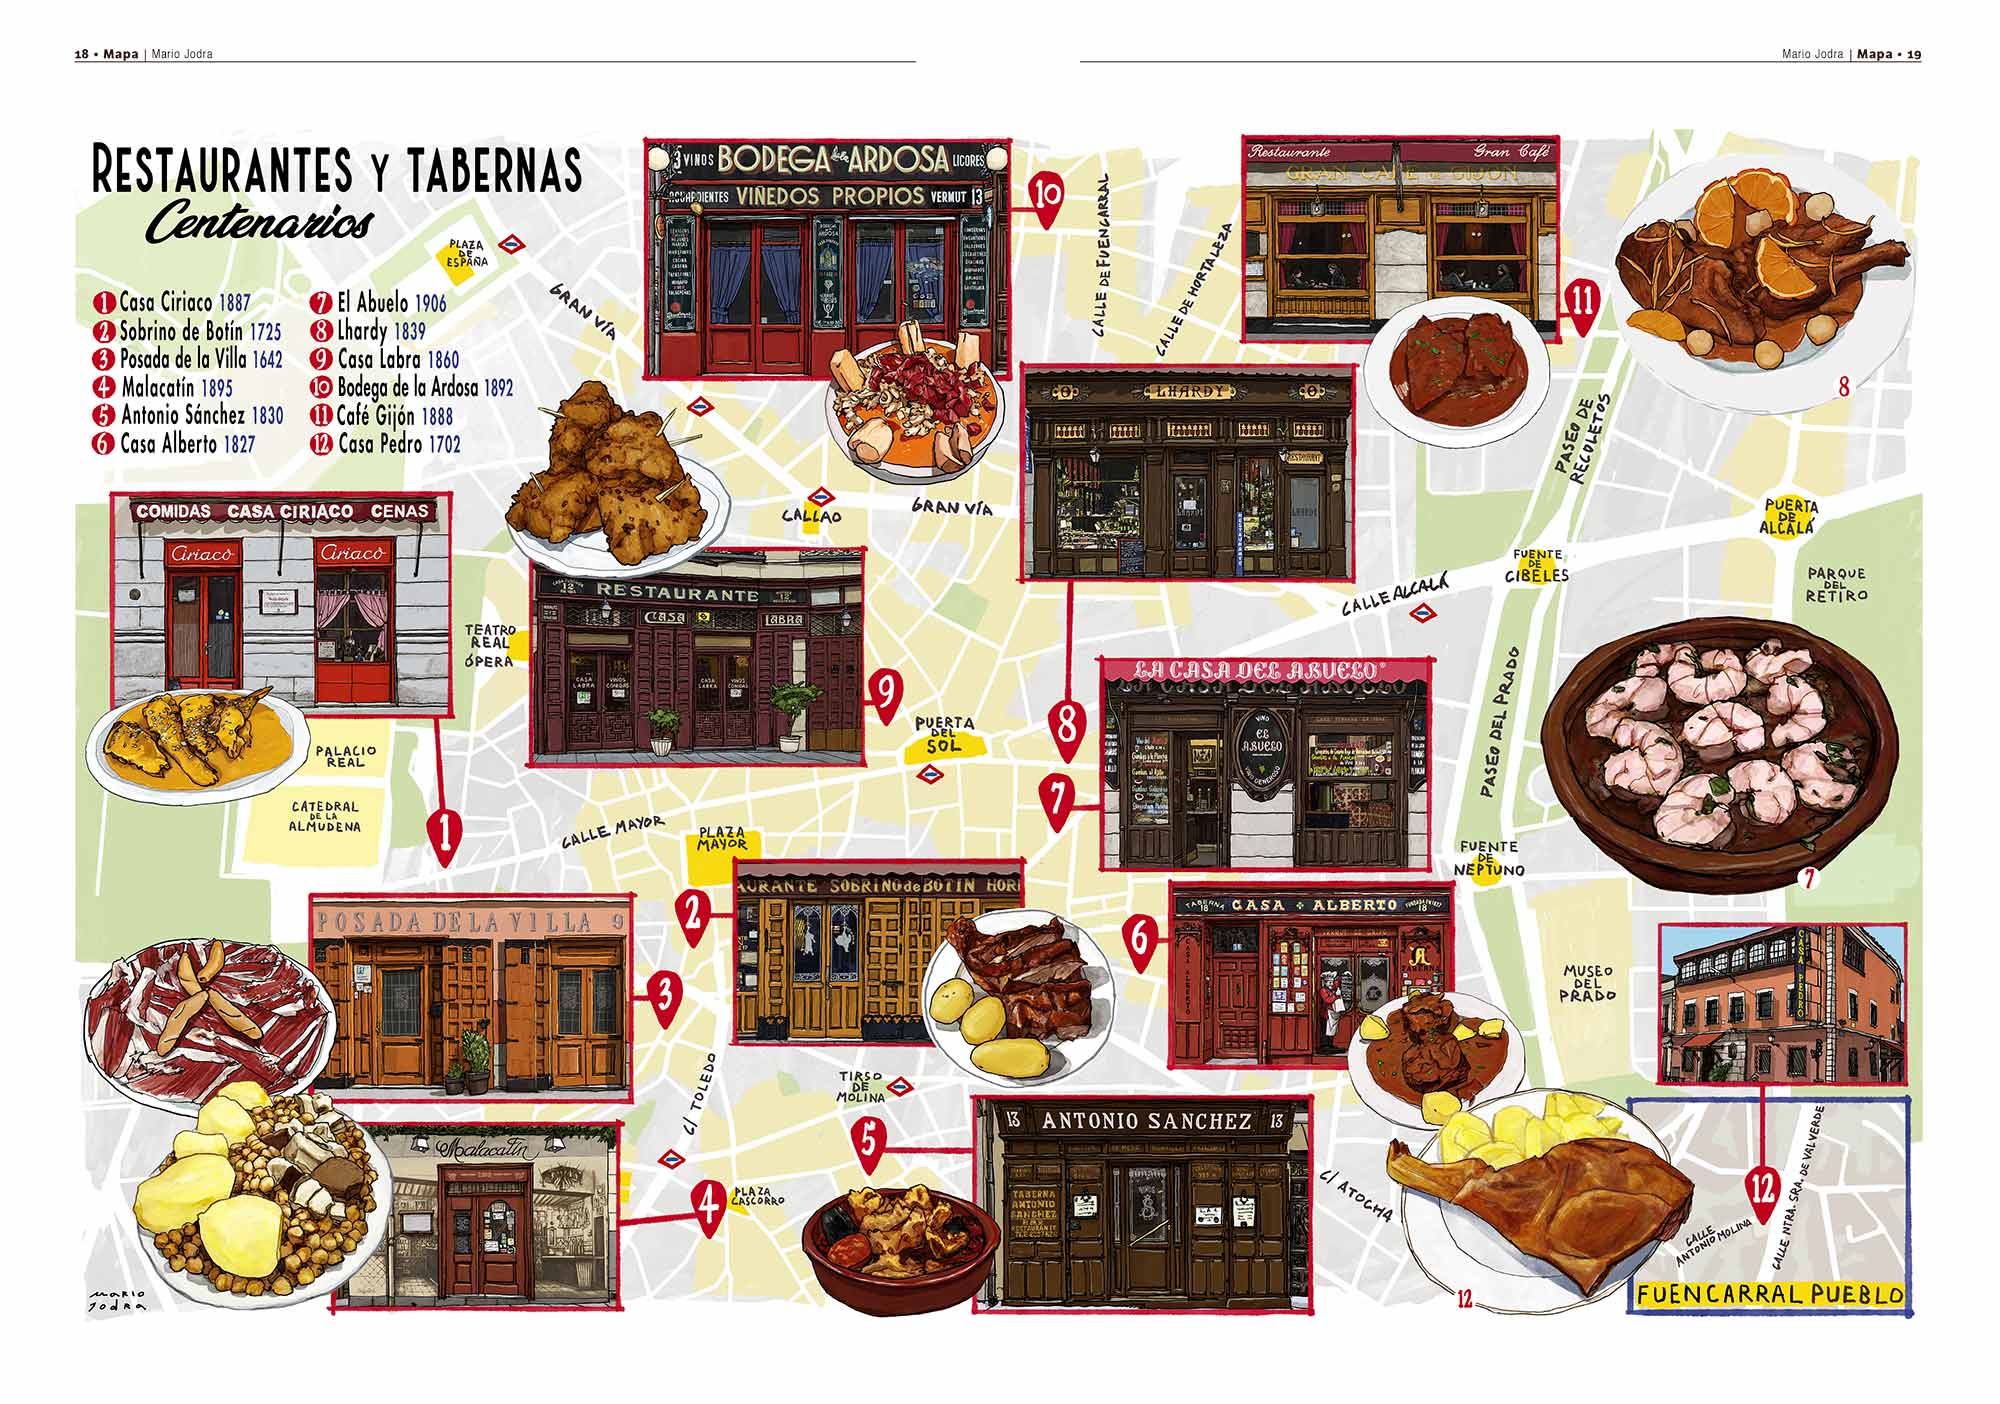 Mario Jodra illustration Art - Map for eme21, an illustrated cultural magazine. The map was used for a campaign of tourist and gastronomic guides of the Madrid City Council